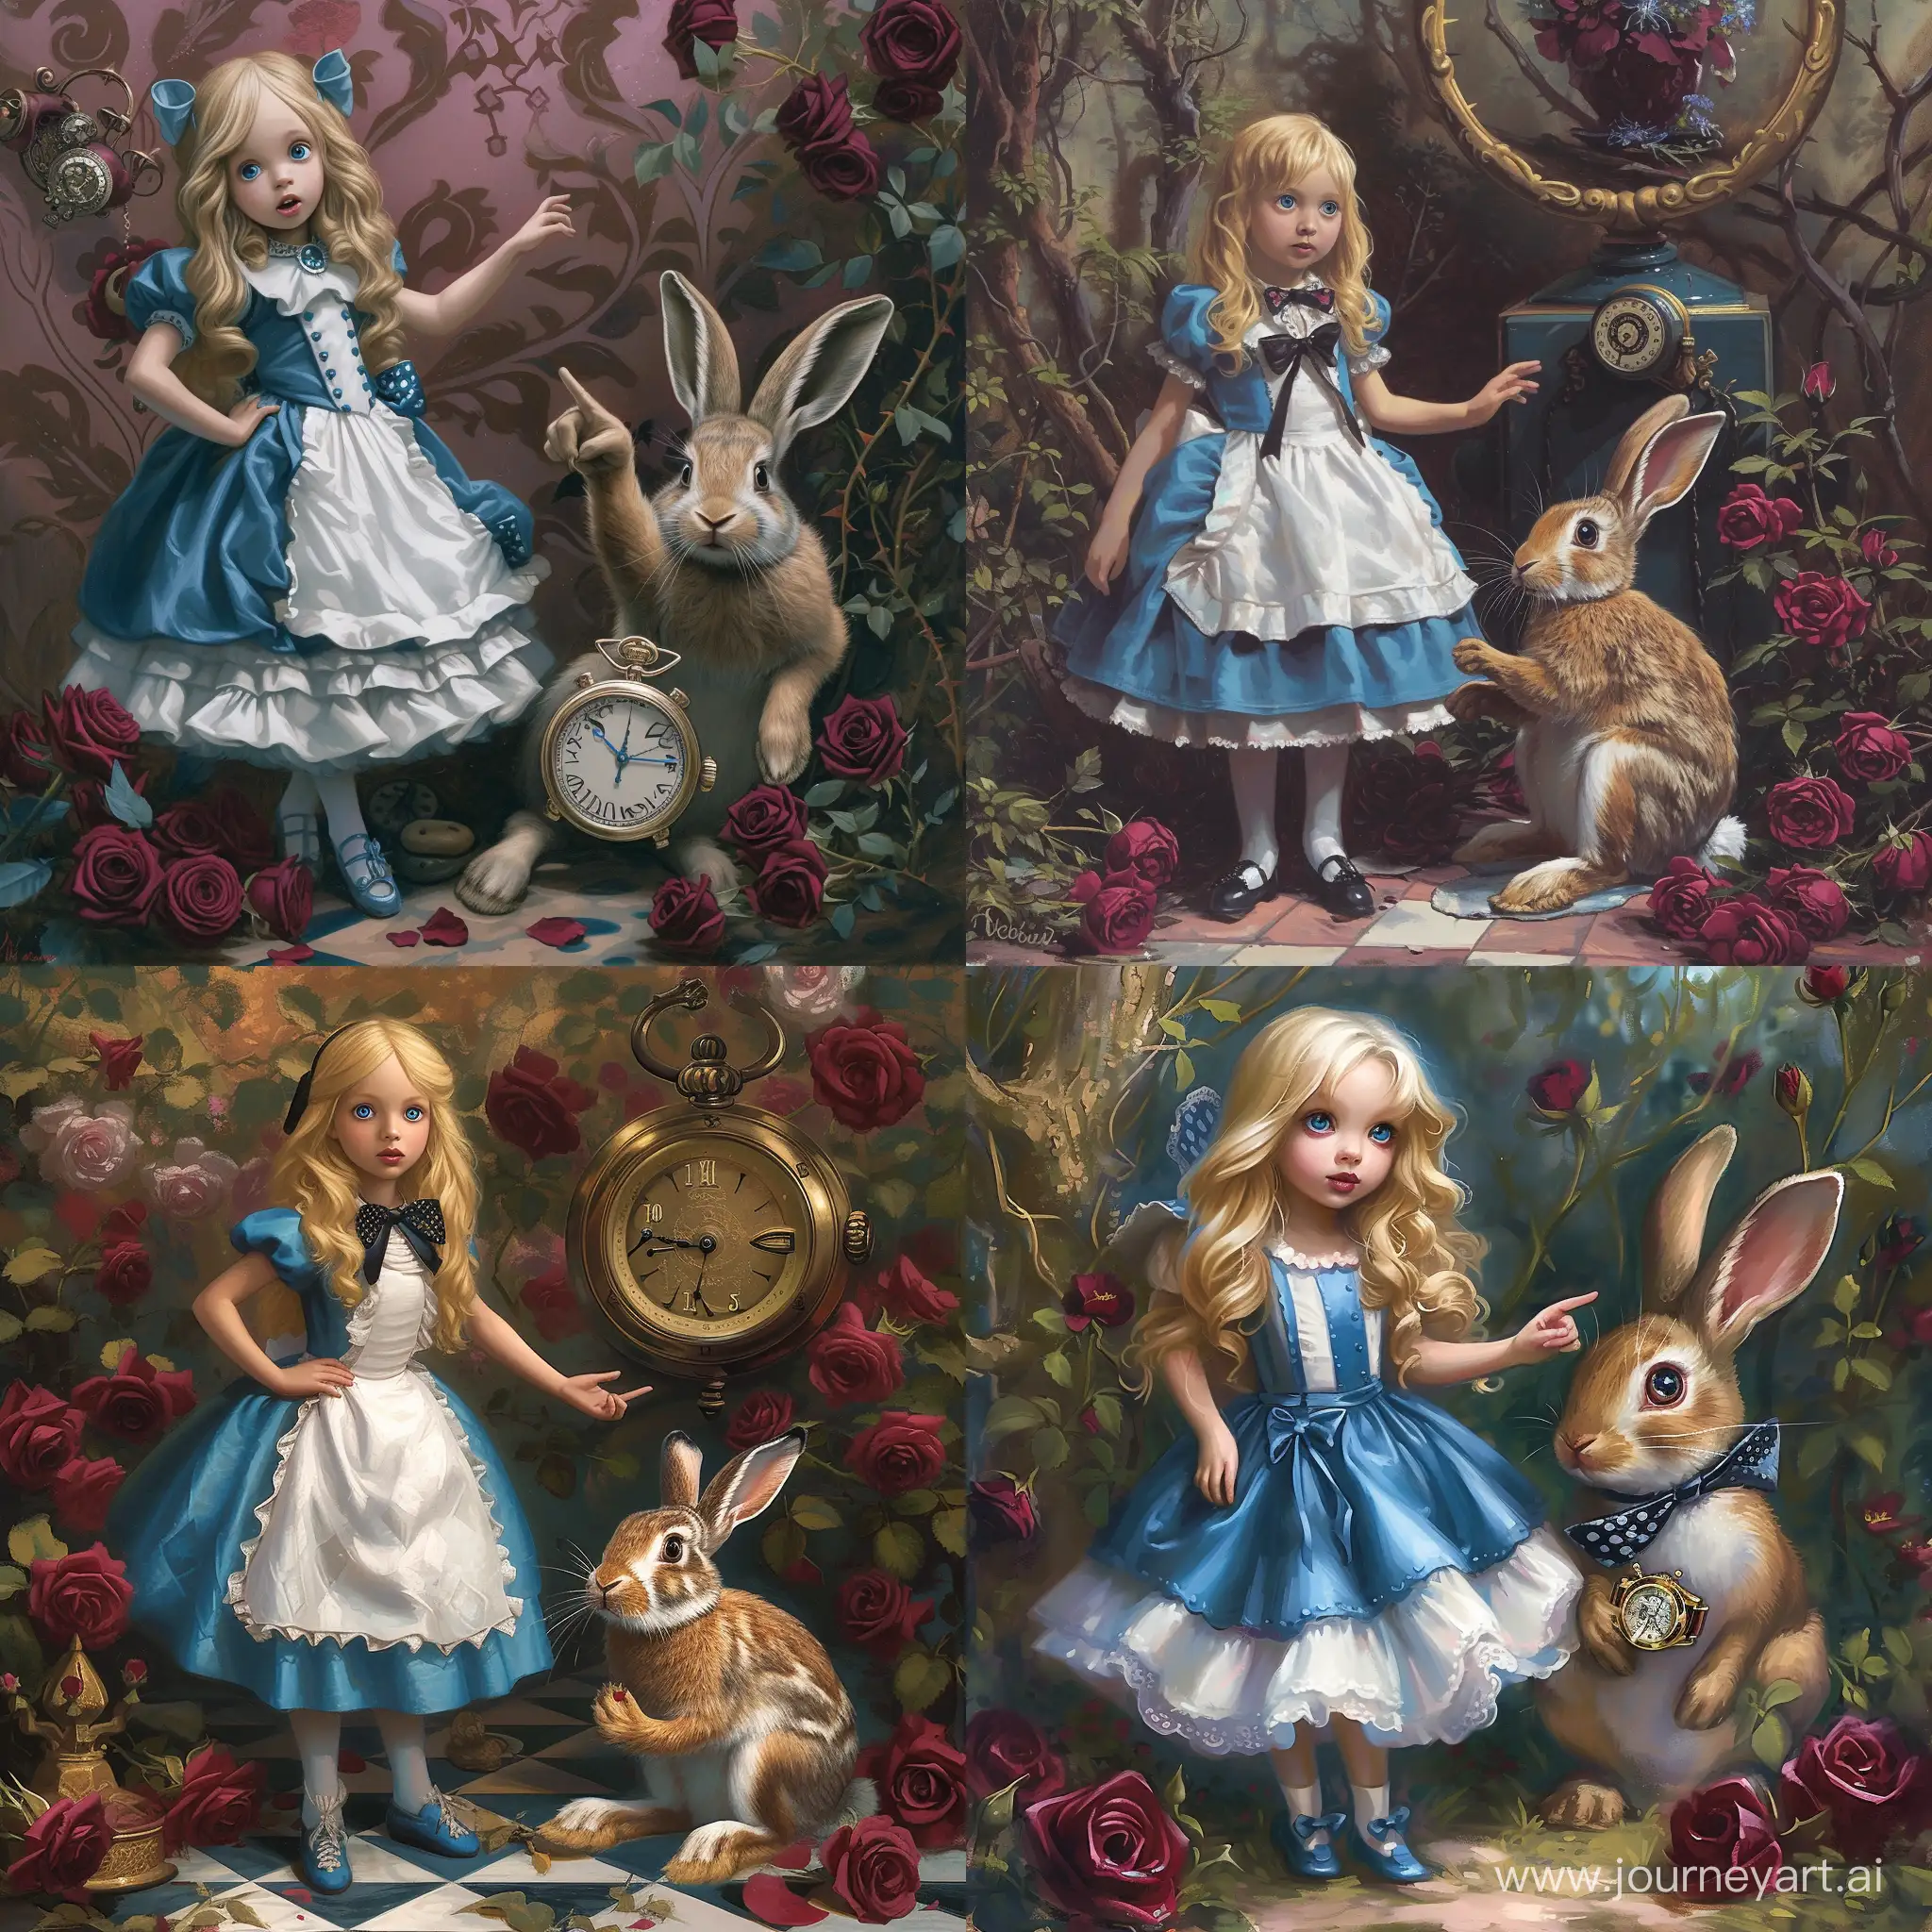 Enchanting-Alice-in-Wonderland-Scene-with-Rabbit-and-Roses